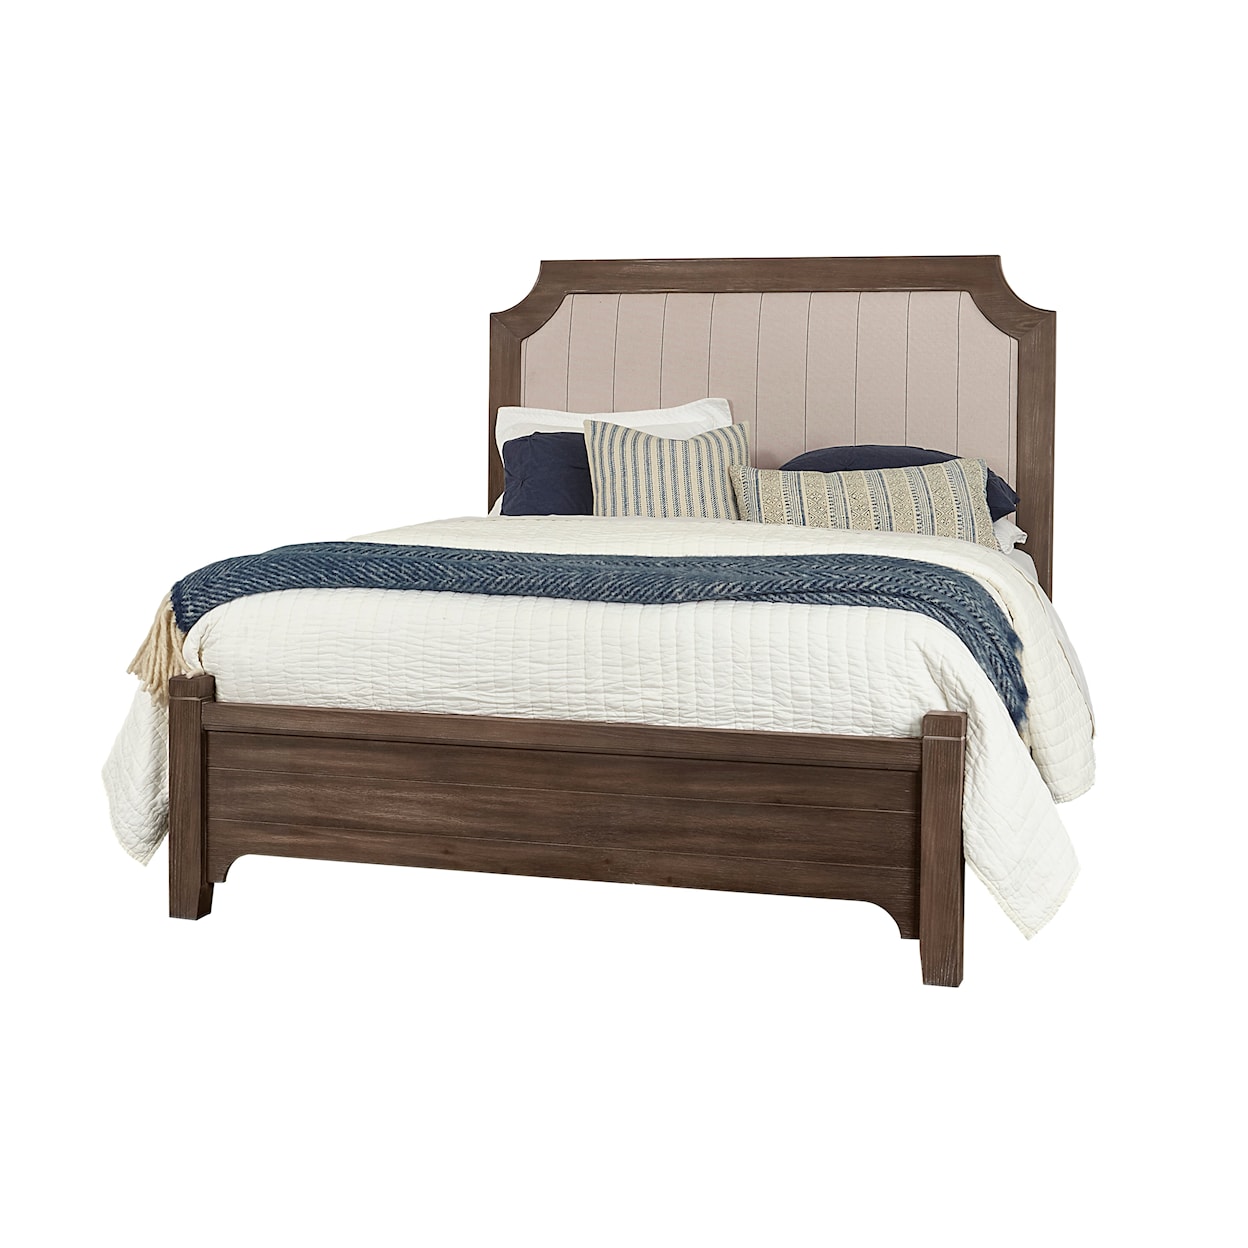 Laurel Mercantile Co. Bungalow King Upholstered Bed